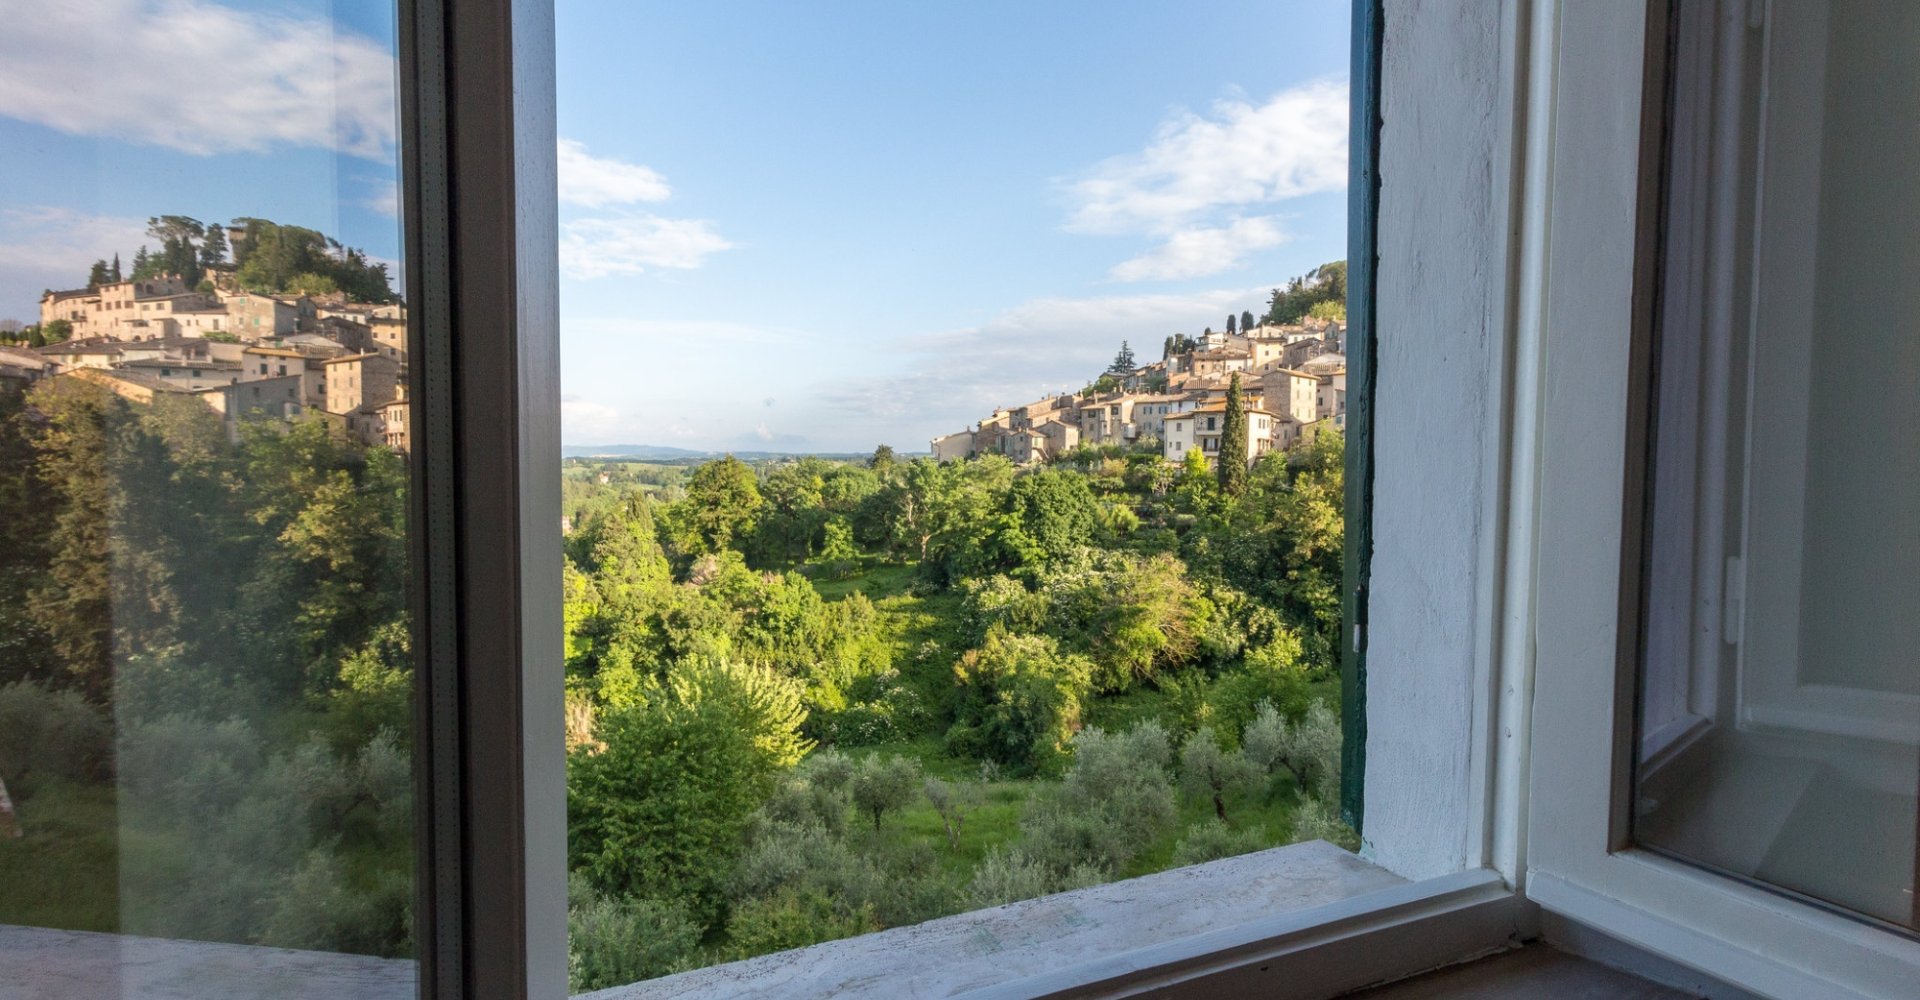 Tuscany as seen from the window of a house